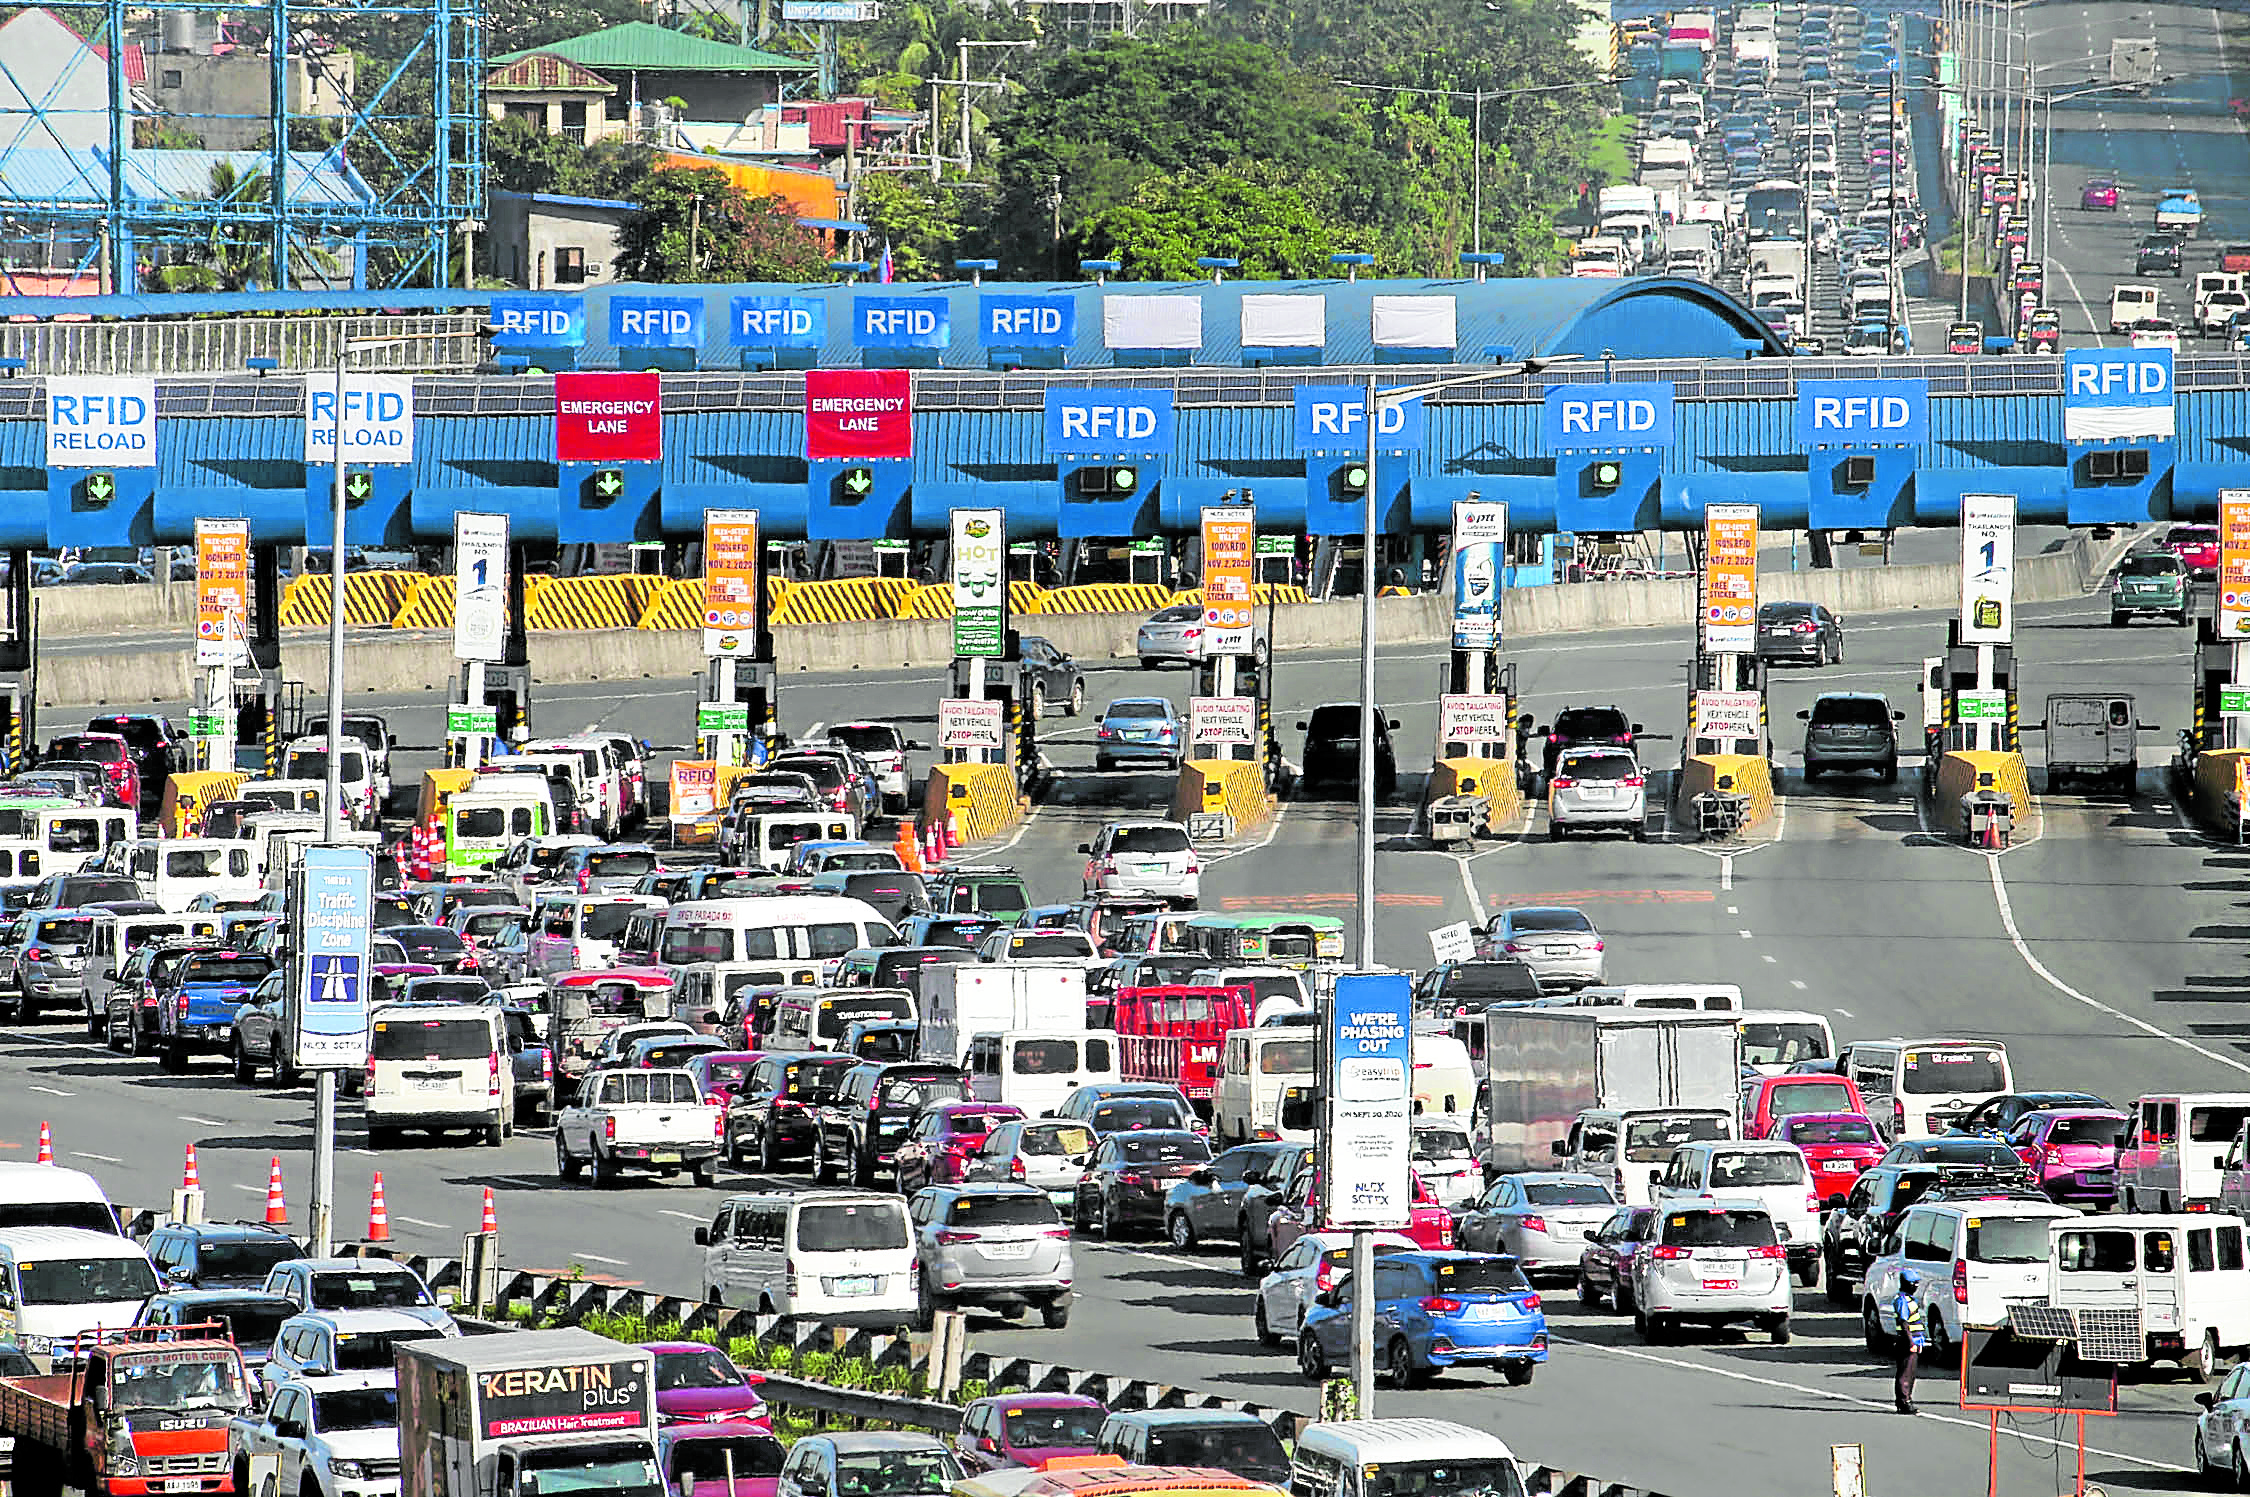 Bulacan execs also hit NLEx ‘poor’ cashless toll system | Inquirer News